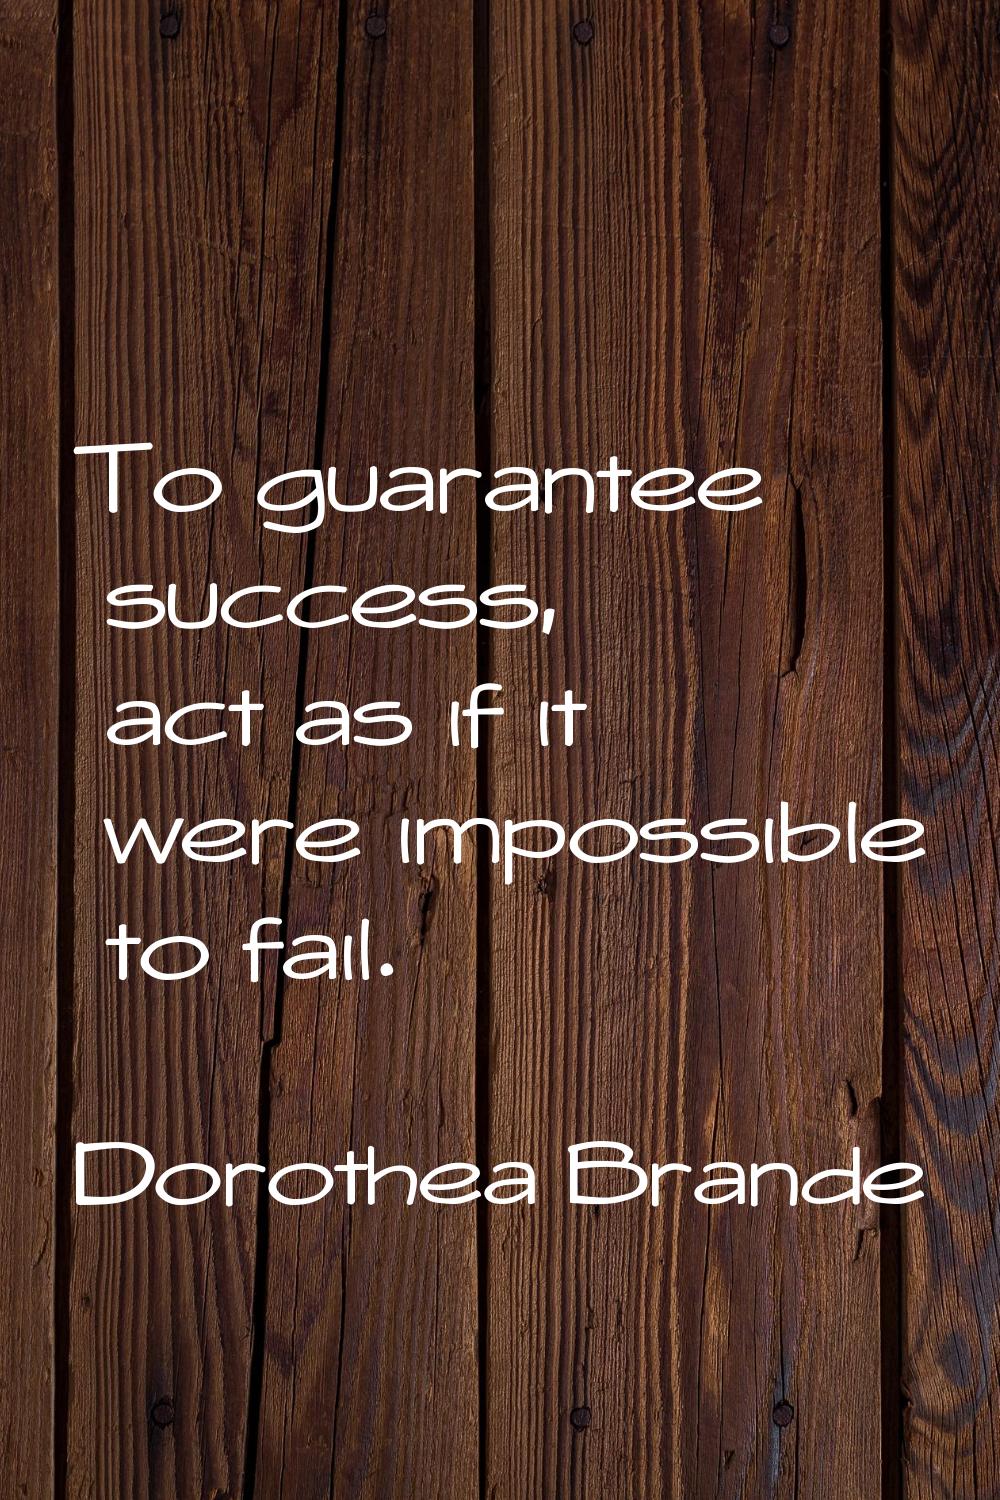 To guarantee success, act as if it were impossible to fail.